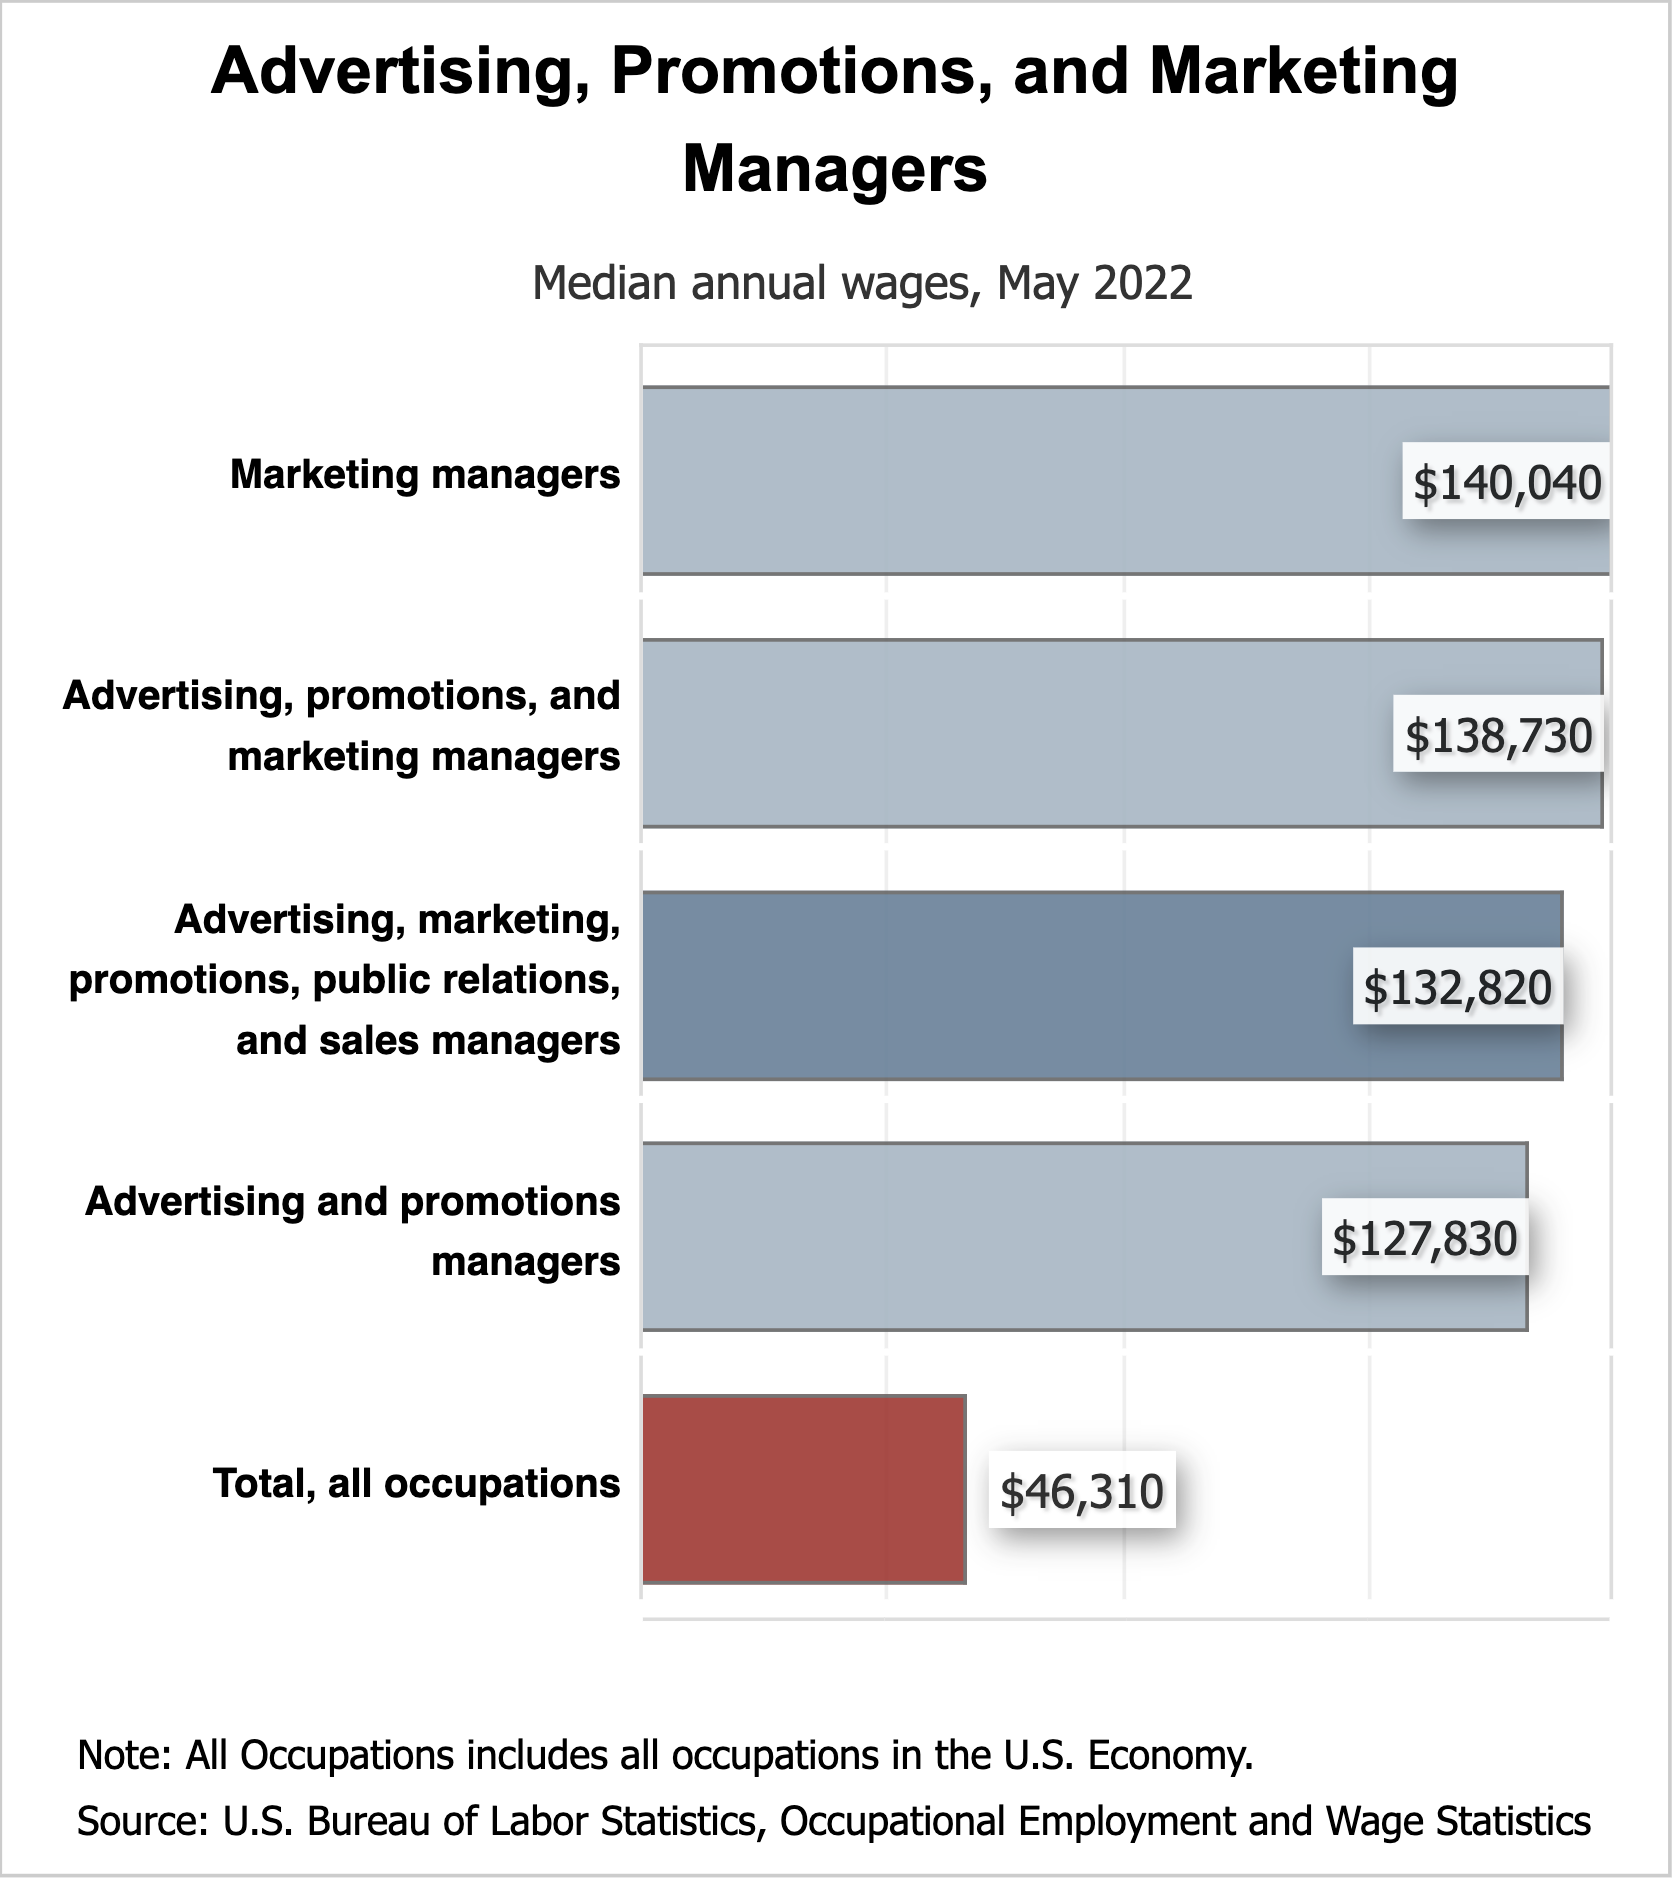 BLS Salary Information for Digital Marketers